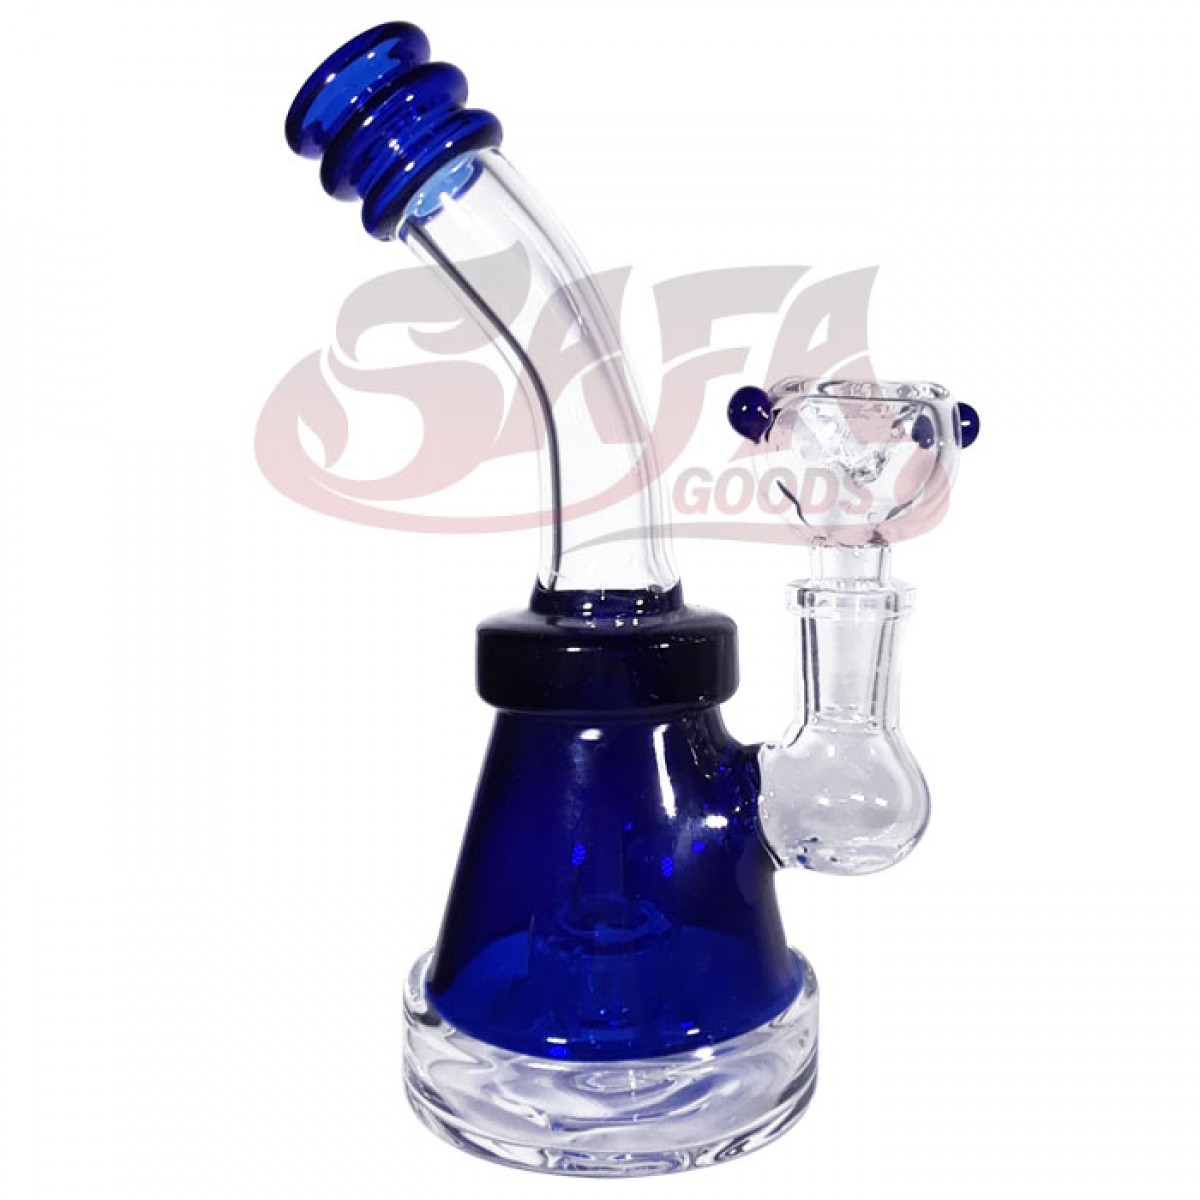 7 Inch Banger Hanger Water Pipes -  Showerhead Perc